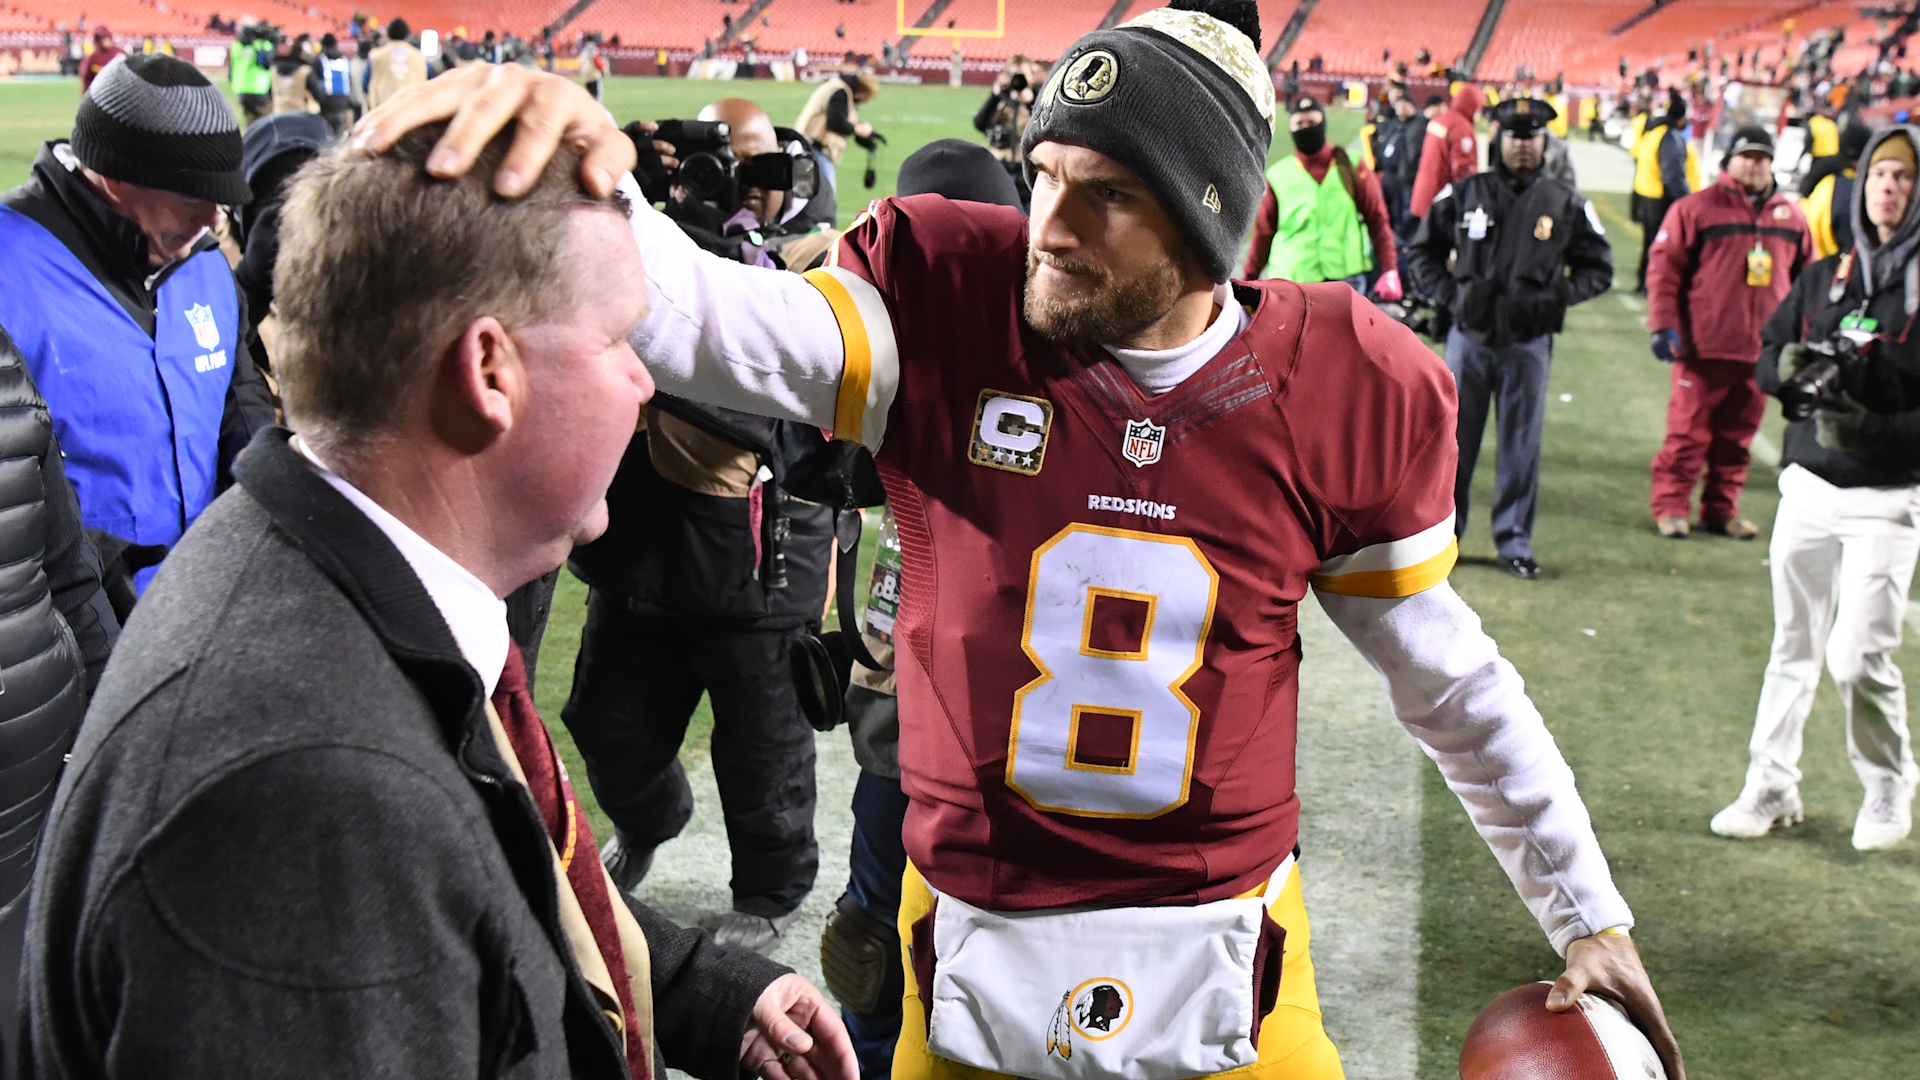 Washington Redskins players complain about loyalty of home fans